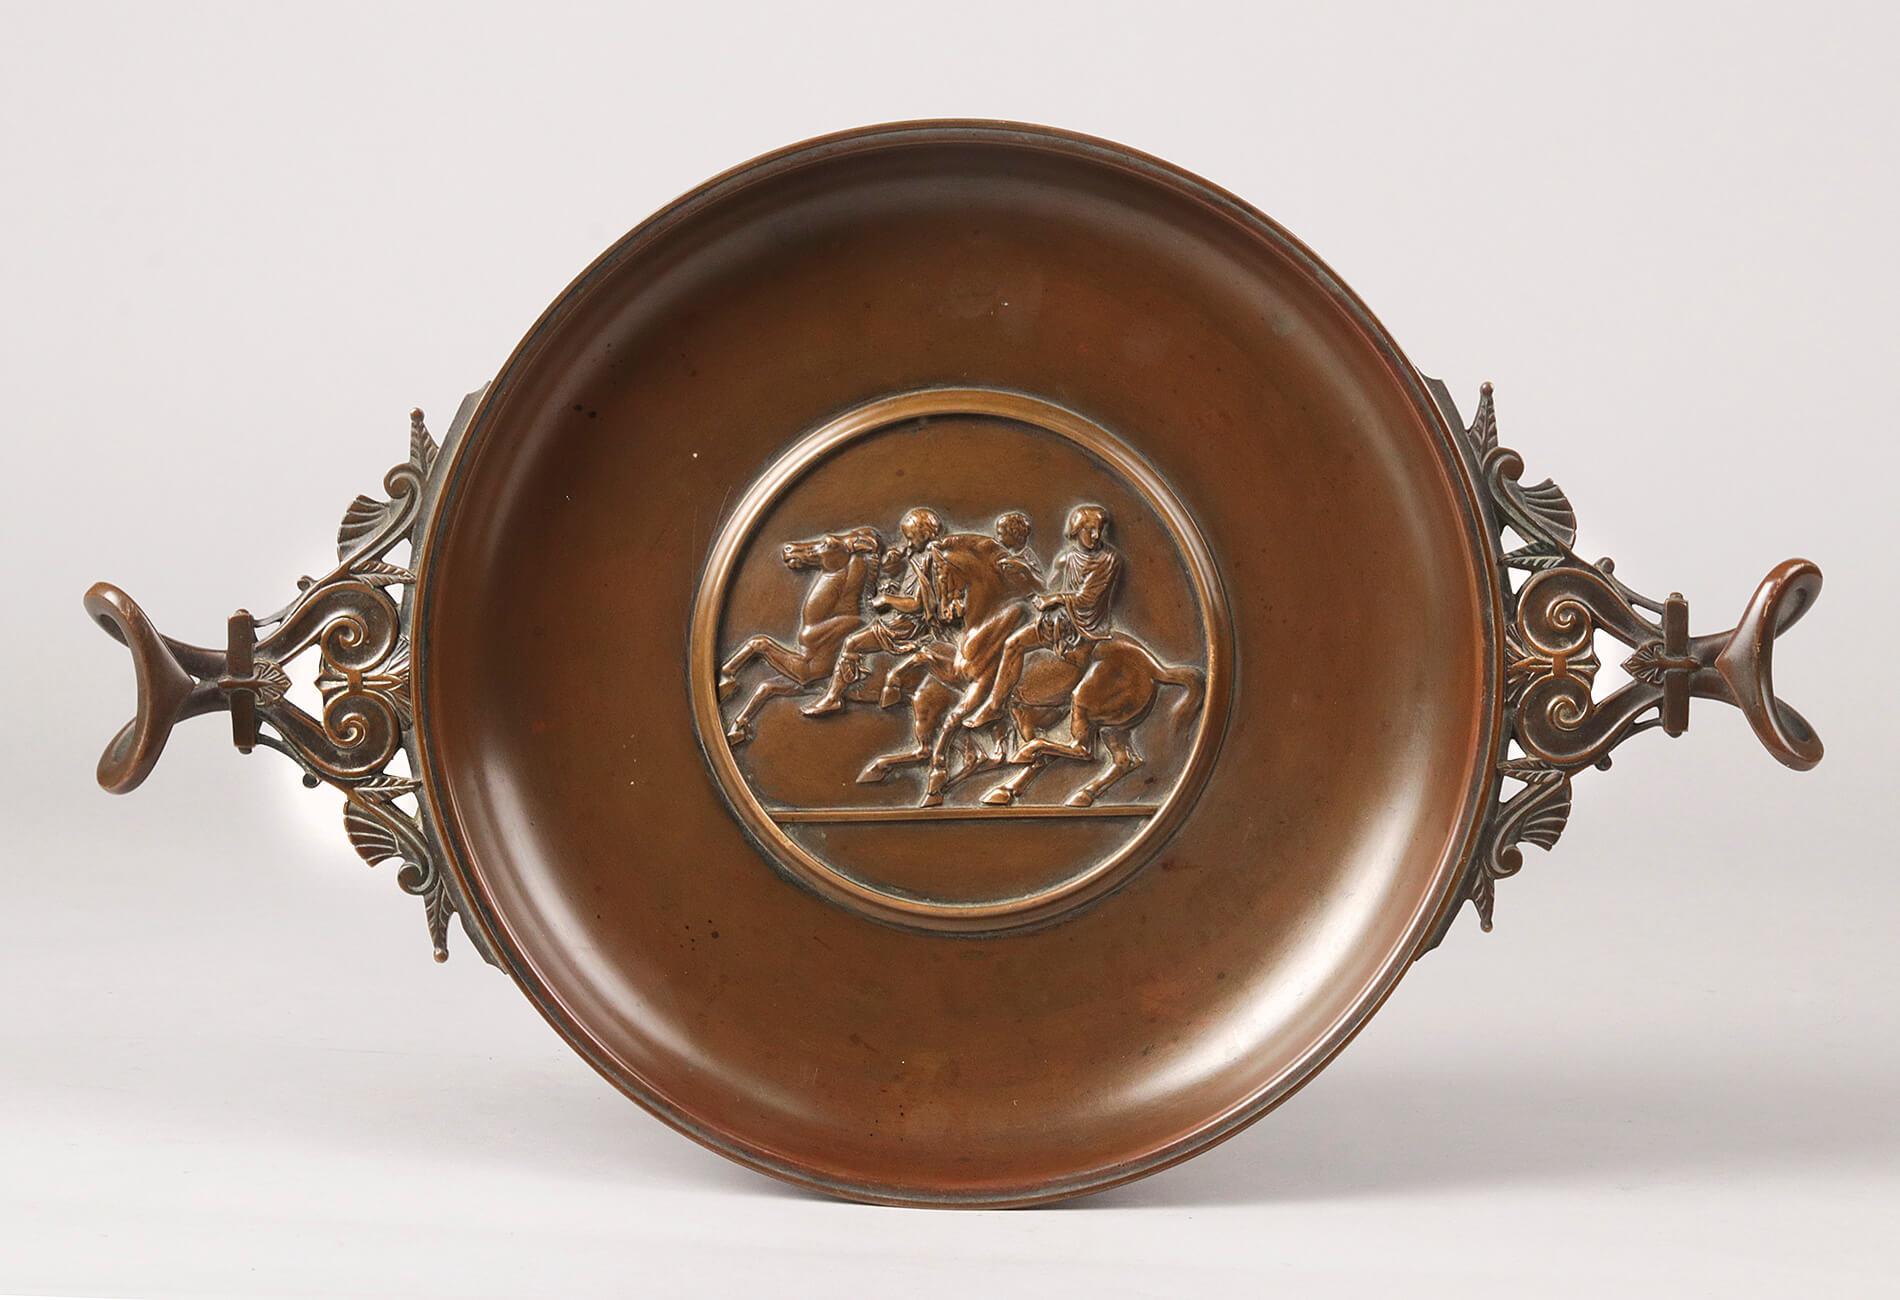 A Roman-classical style decorative bowl, cast in bronze, brown patinated finish. This antique coupe is signed by Ferdinand Barbedienne (France, 1810-1892). In the center a depiction of horse riders from the classical Roman era. The bottom is also